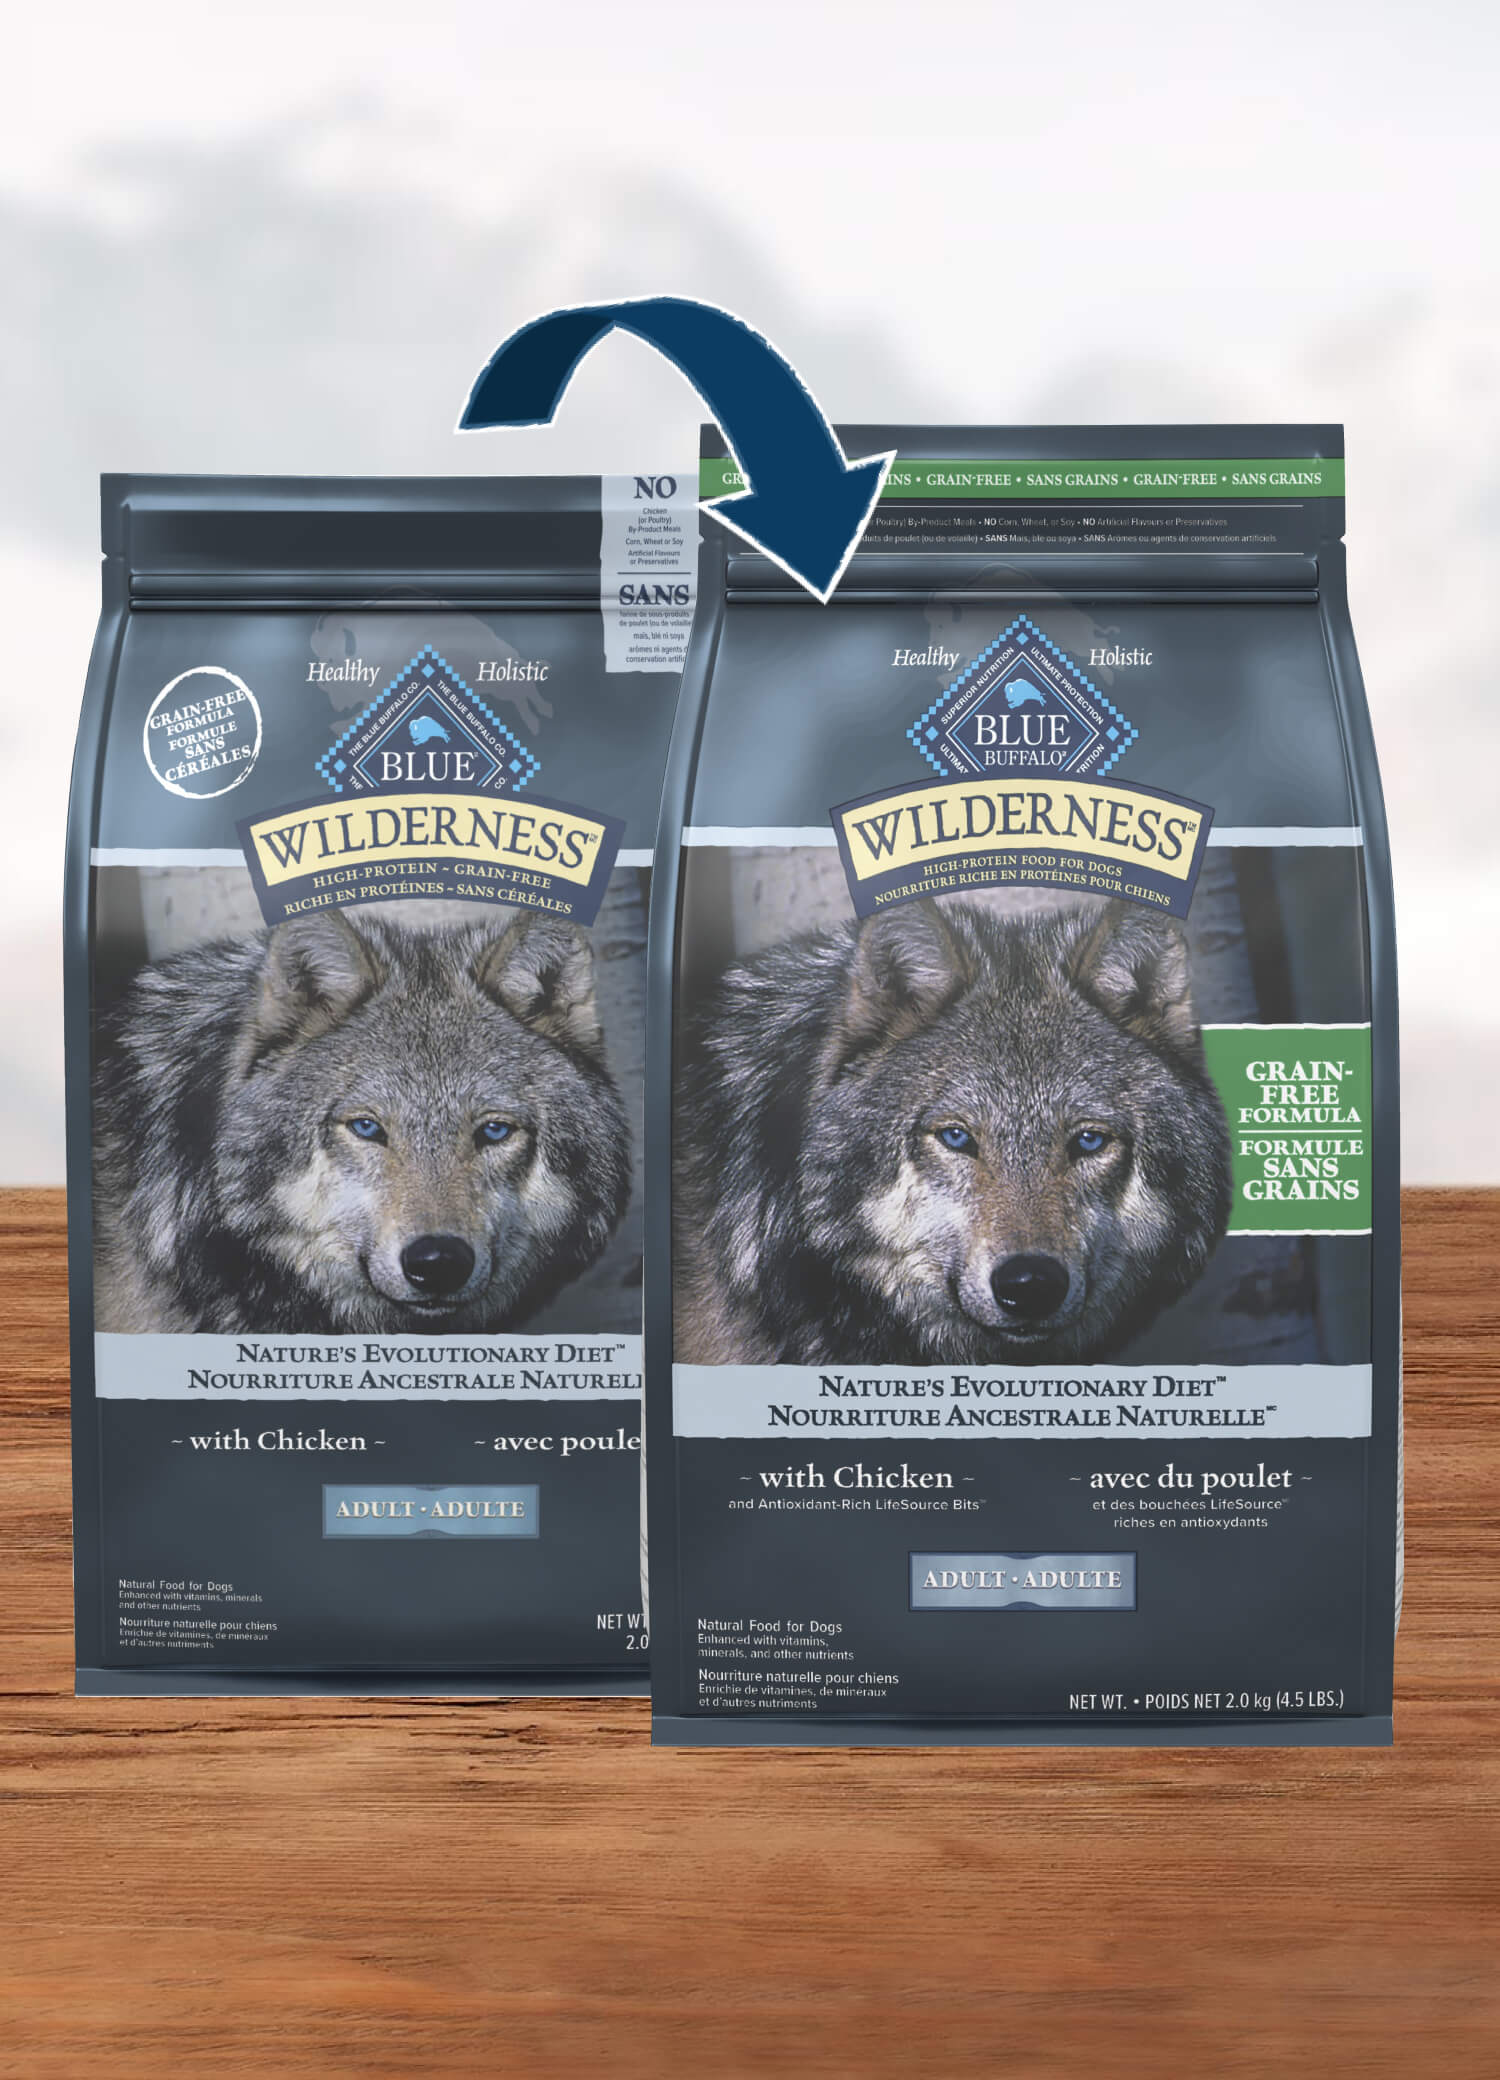 Displaying Two bags of Blue Buffalo Wilderness chicken-flavored, grain-free dog food with an image of a wolf on the front, indicating a switch from grain to grain-free formula highlighting the packaging transition.